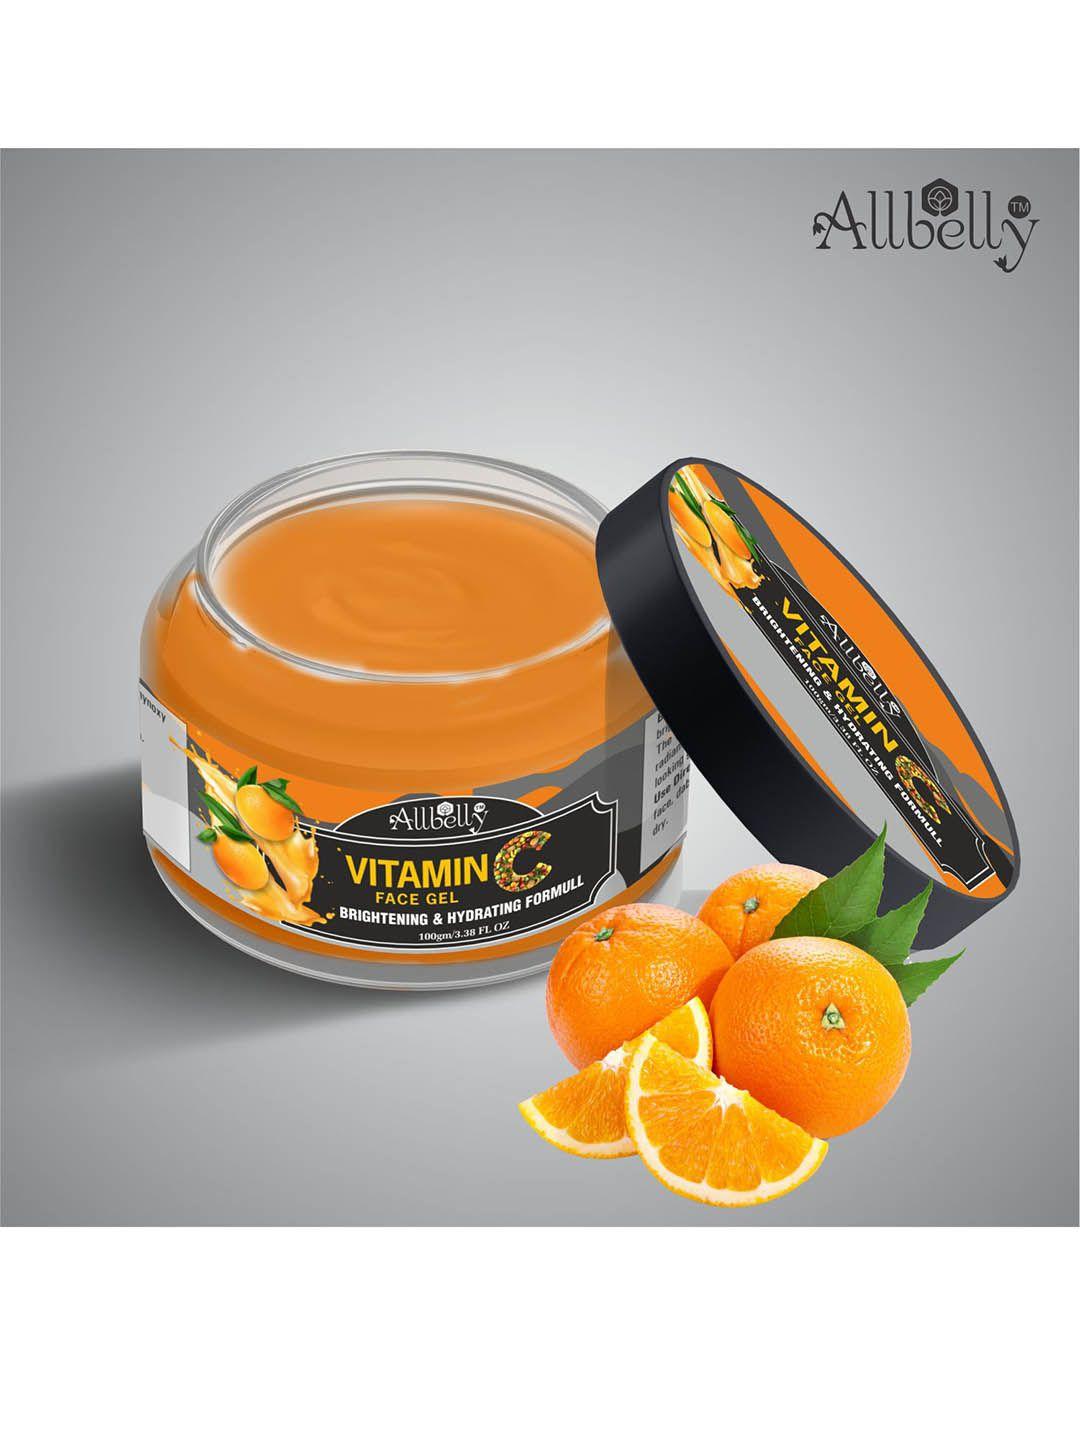 allbelly vitamin c light moisturizer face gel for daily use-100gm